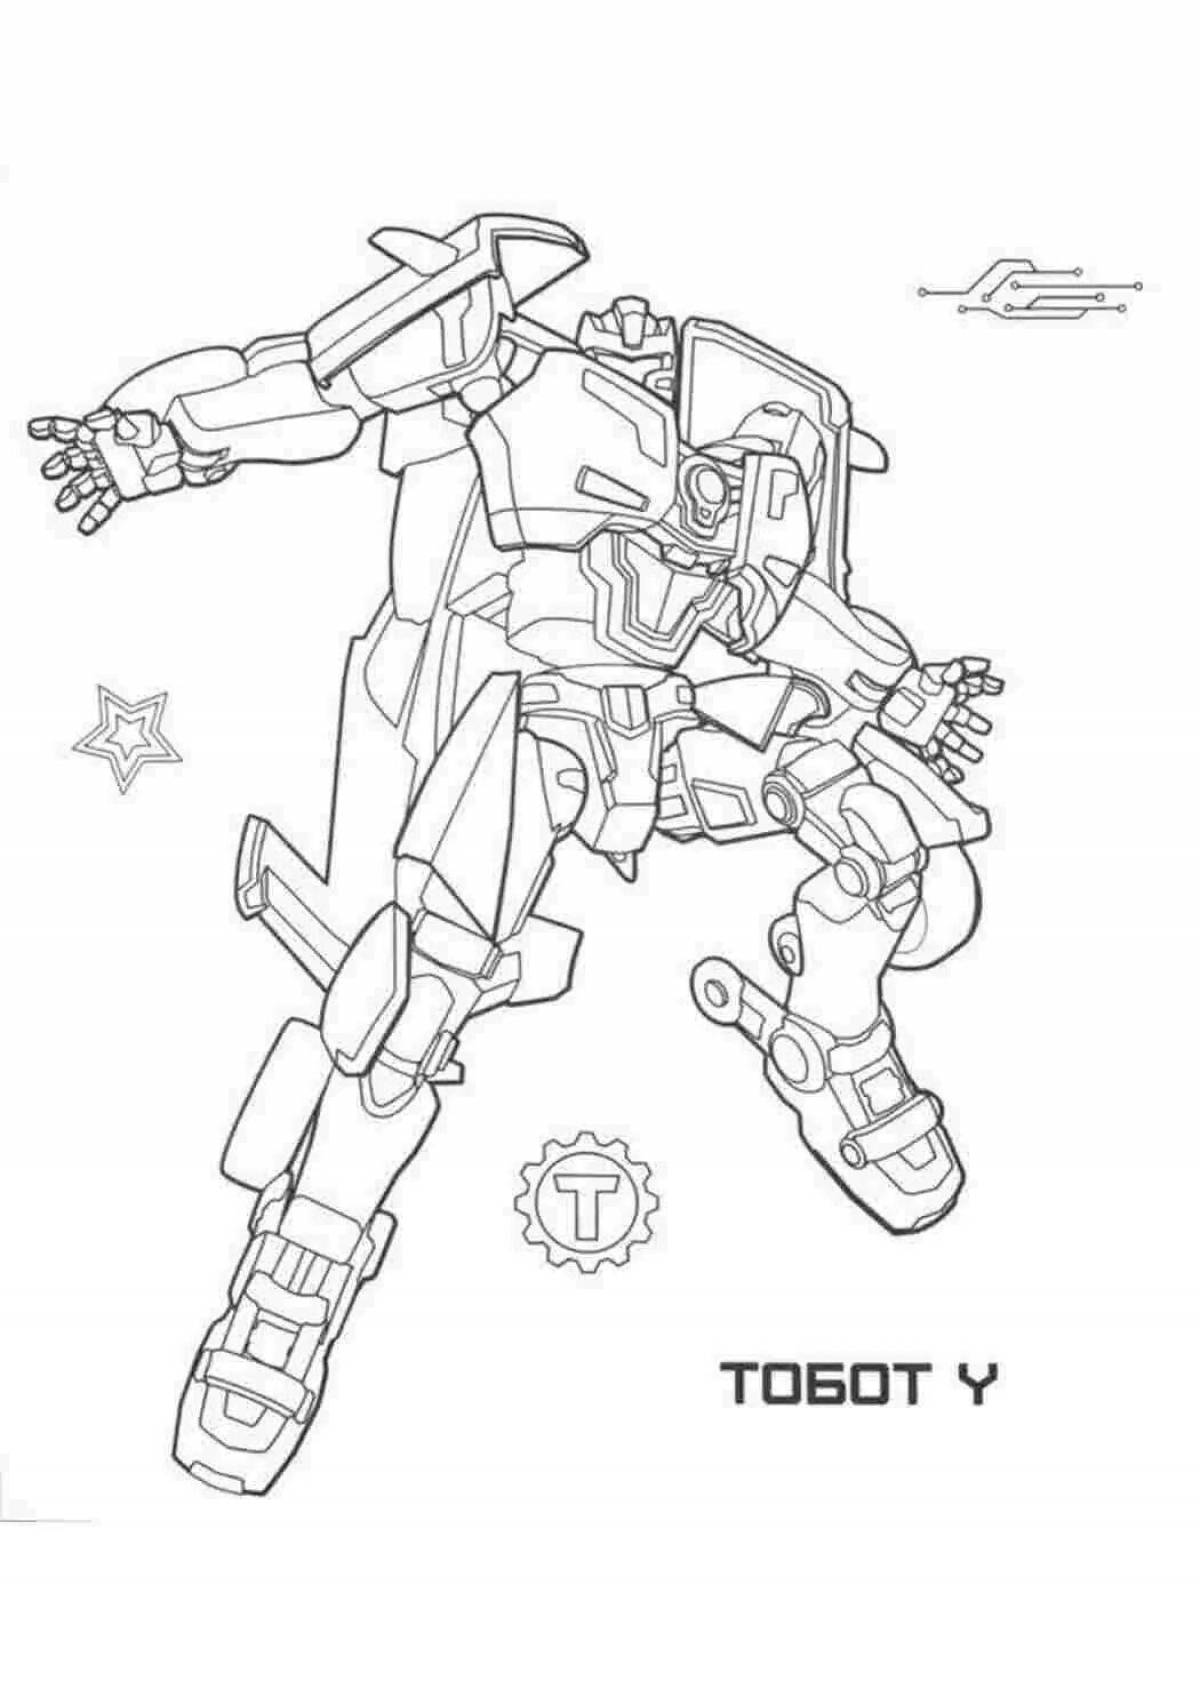 Coloring page charming robot tobot